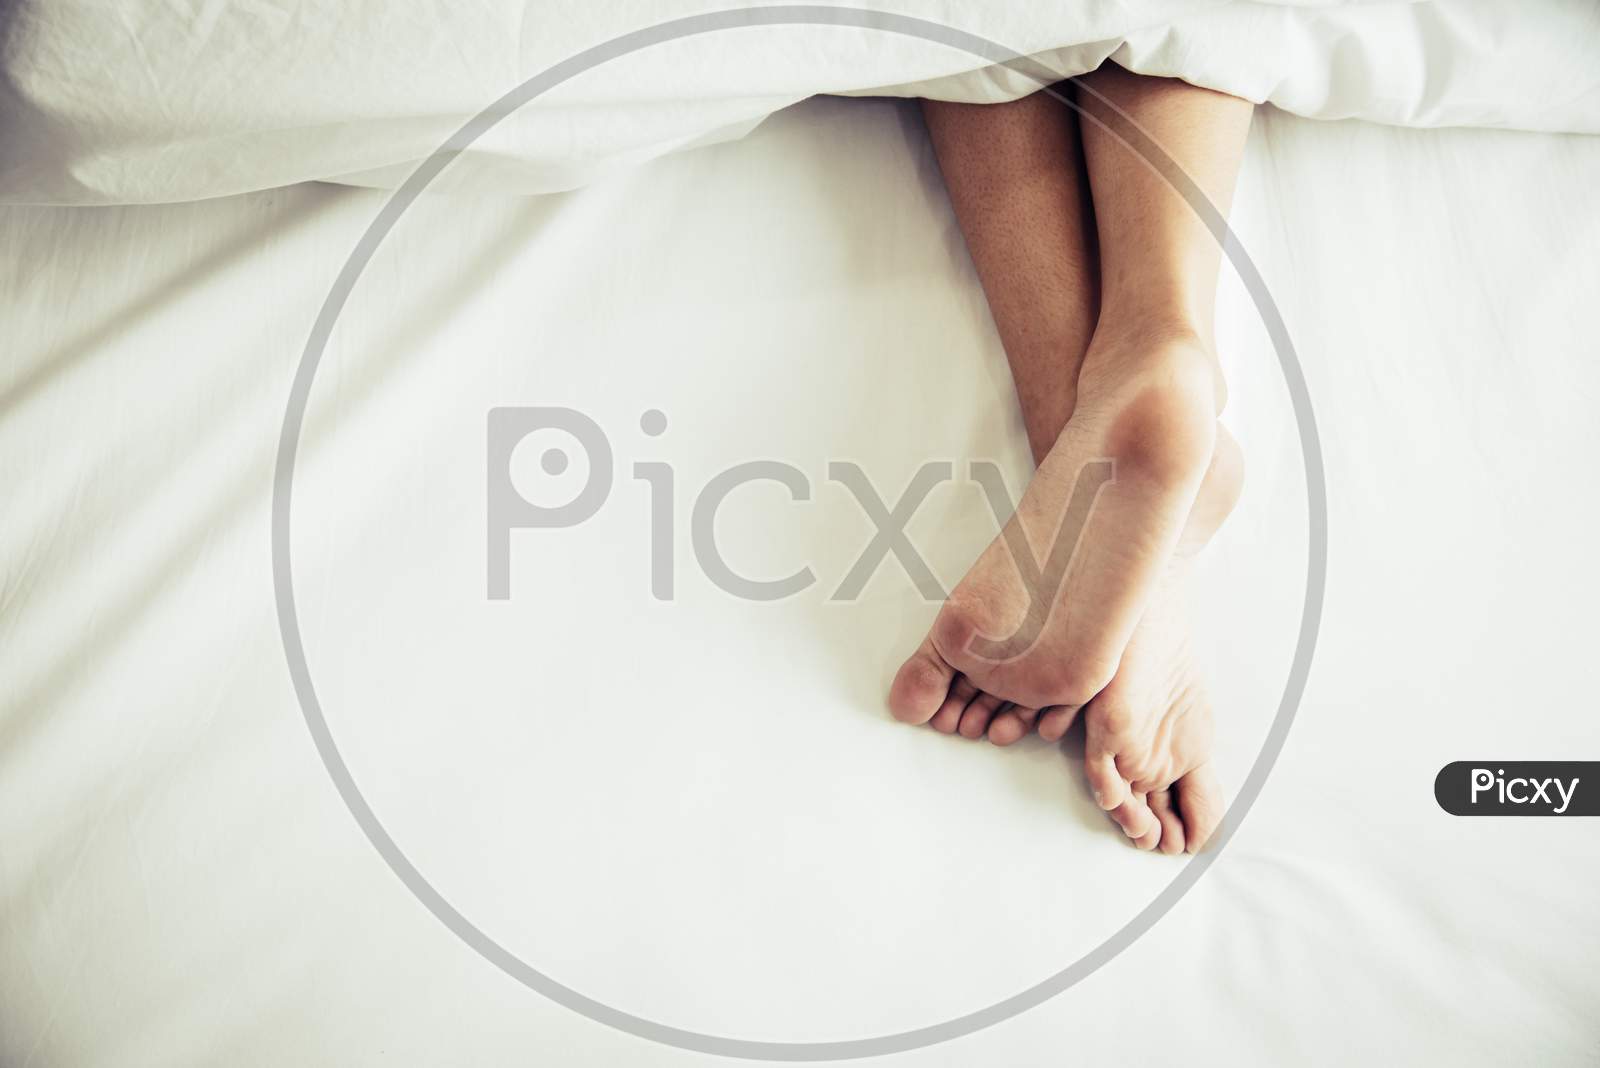 Barefoot Of Human On Bed In Morning. Single And Working People Concept. Lazy Day And Happiness Home Theme.